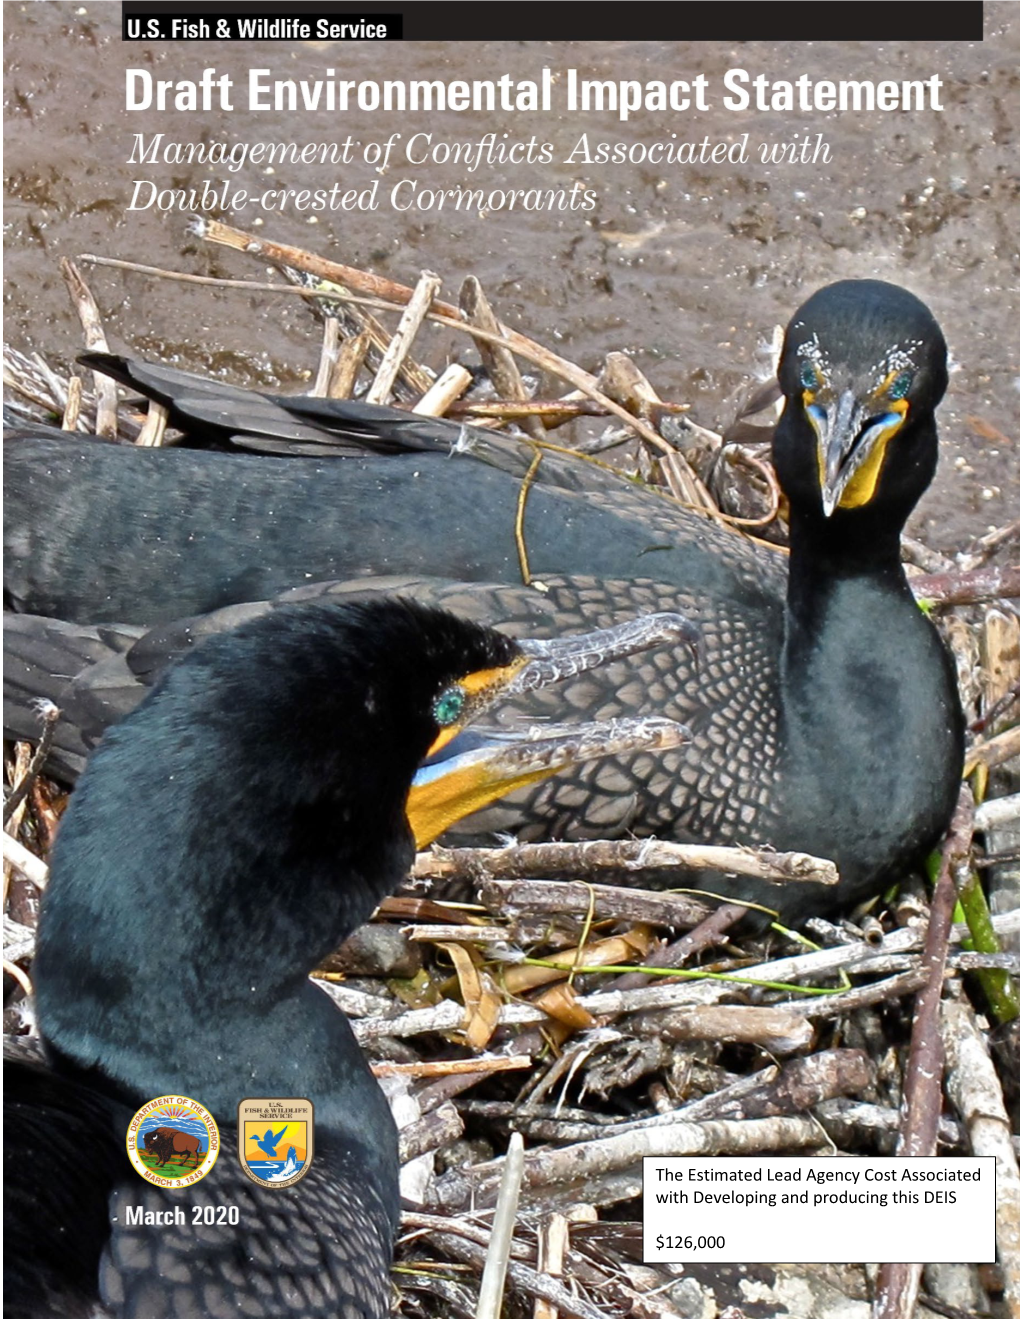 Management of Conflicts Associated with Double-Crested Cormorants